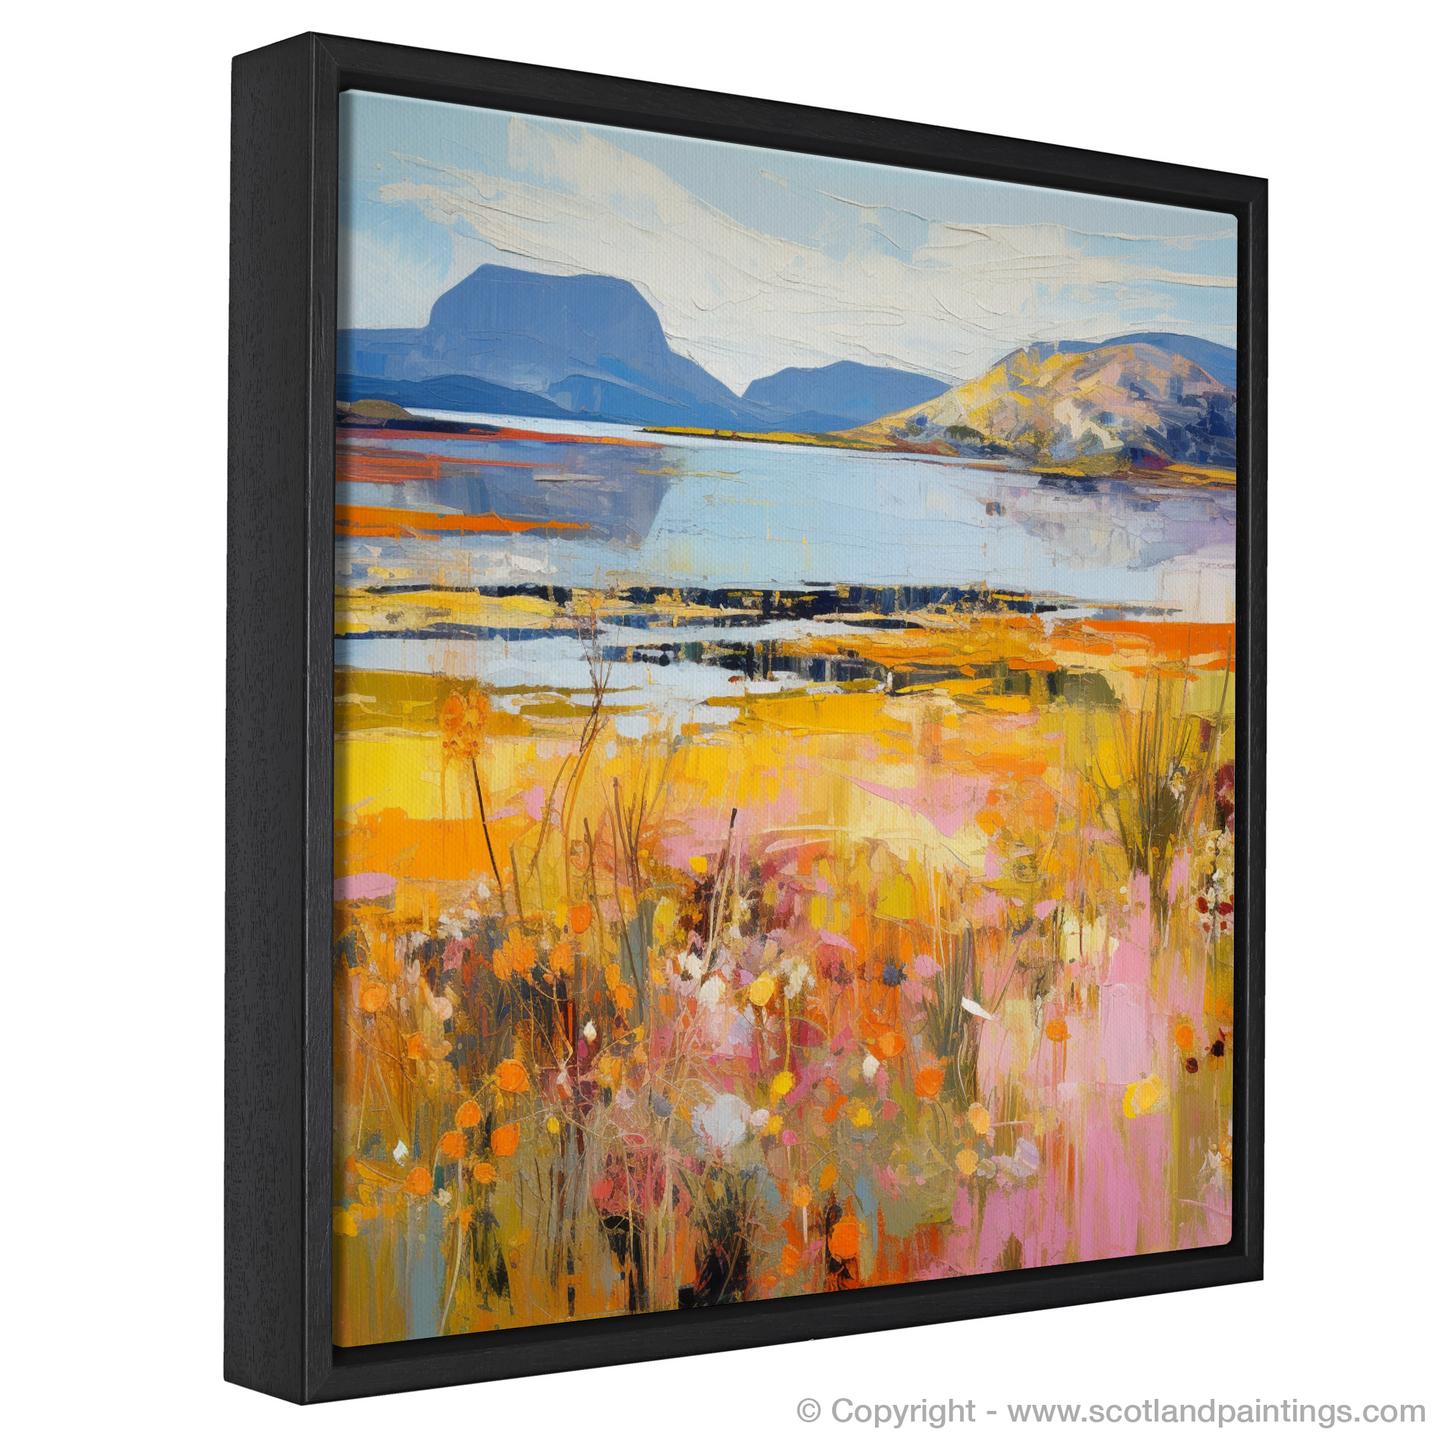 Painting and Art Print of Isle of Raasay, Inner Hebrides in summer entitled "Summer Serenity on the Isle of Raasay".